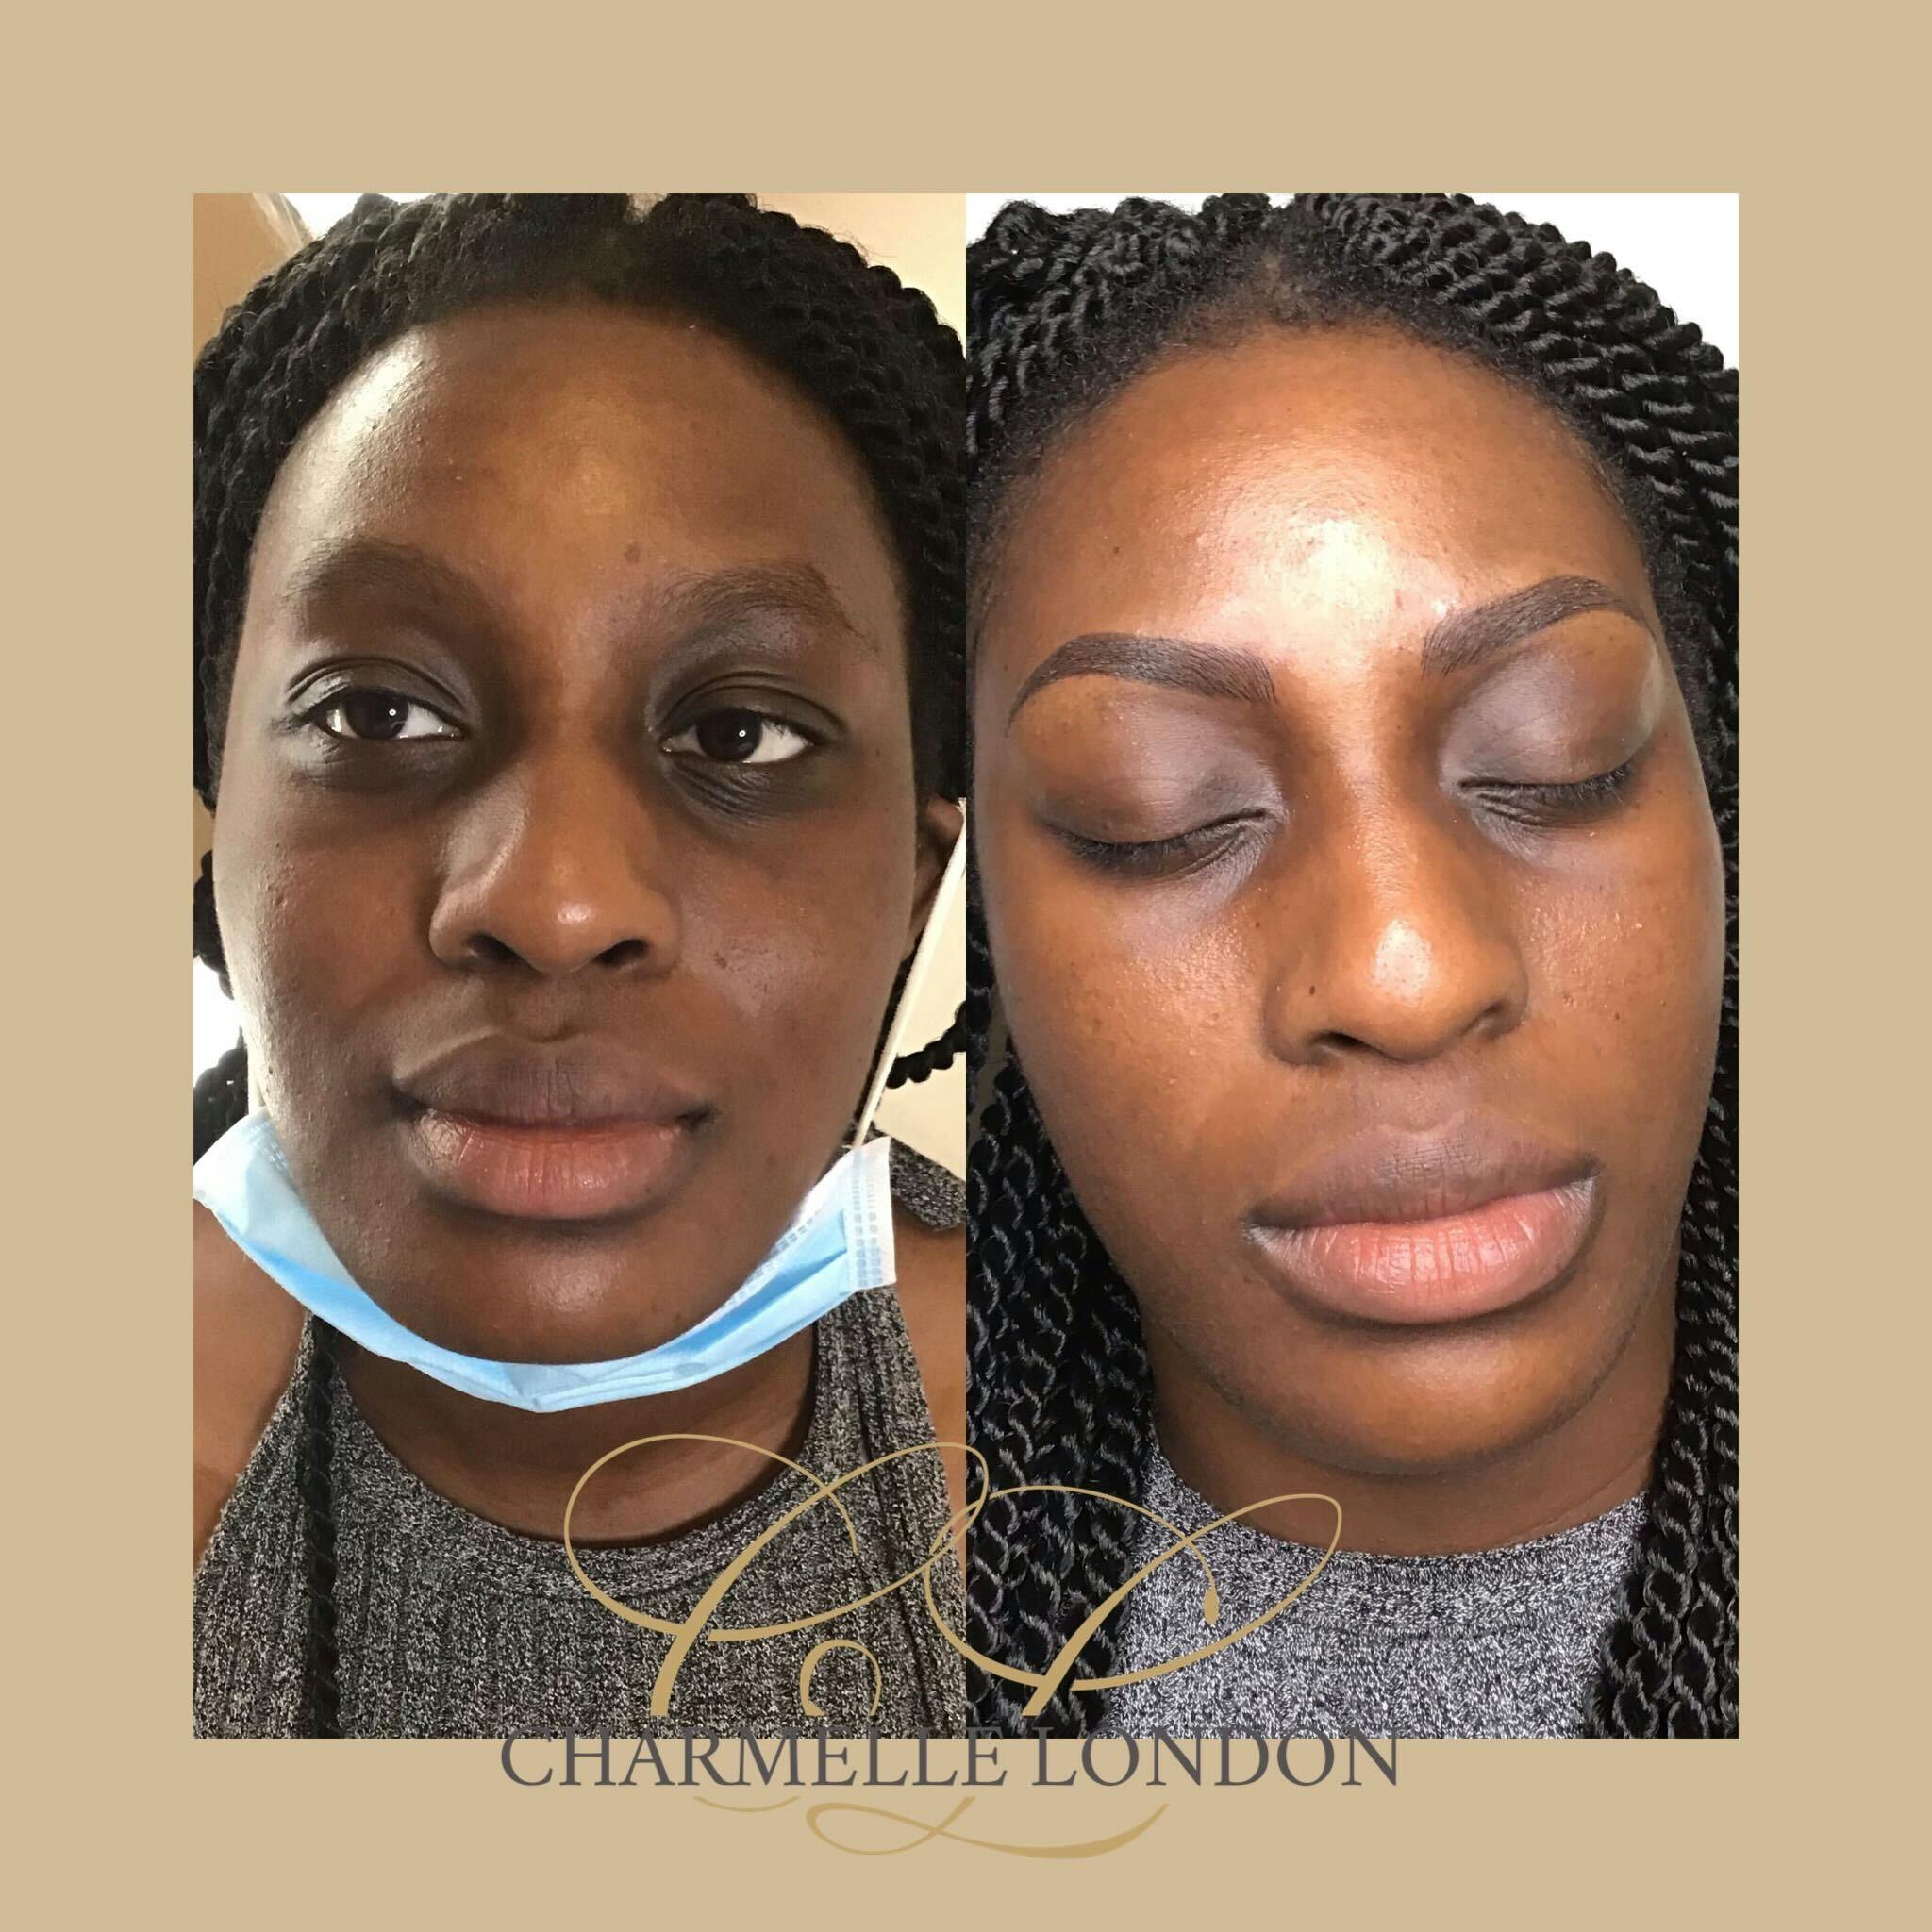 Are you looking for a way to enhance your natural beauty with permanent makeup? At Charmelle London, we offer a wide range of permanent makeup services, including eyebrows, eyes, and lips. Our team of experienced artists will work with you to create a look that is unique to your features and your lifestyle.

Whether you are looking for something soft and natural or a more dramatic look, we can help you achieve your desired results. We use the highest quality products and techniques available, so you can be sure that your permanent makeup will look beautiful and last for years to come.

All of our permanent makeup treatments include a complimentary consultation with one of our artists to discuss your goals and expectations. We will also provide you with aftercare instructions to ensure that your new look lasts as long as possible as well as including a complimentary touch up appointment session.